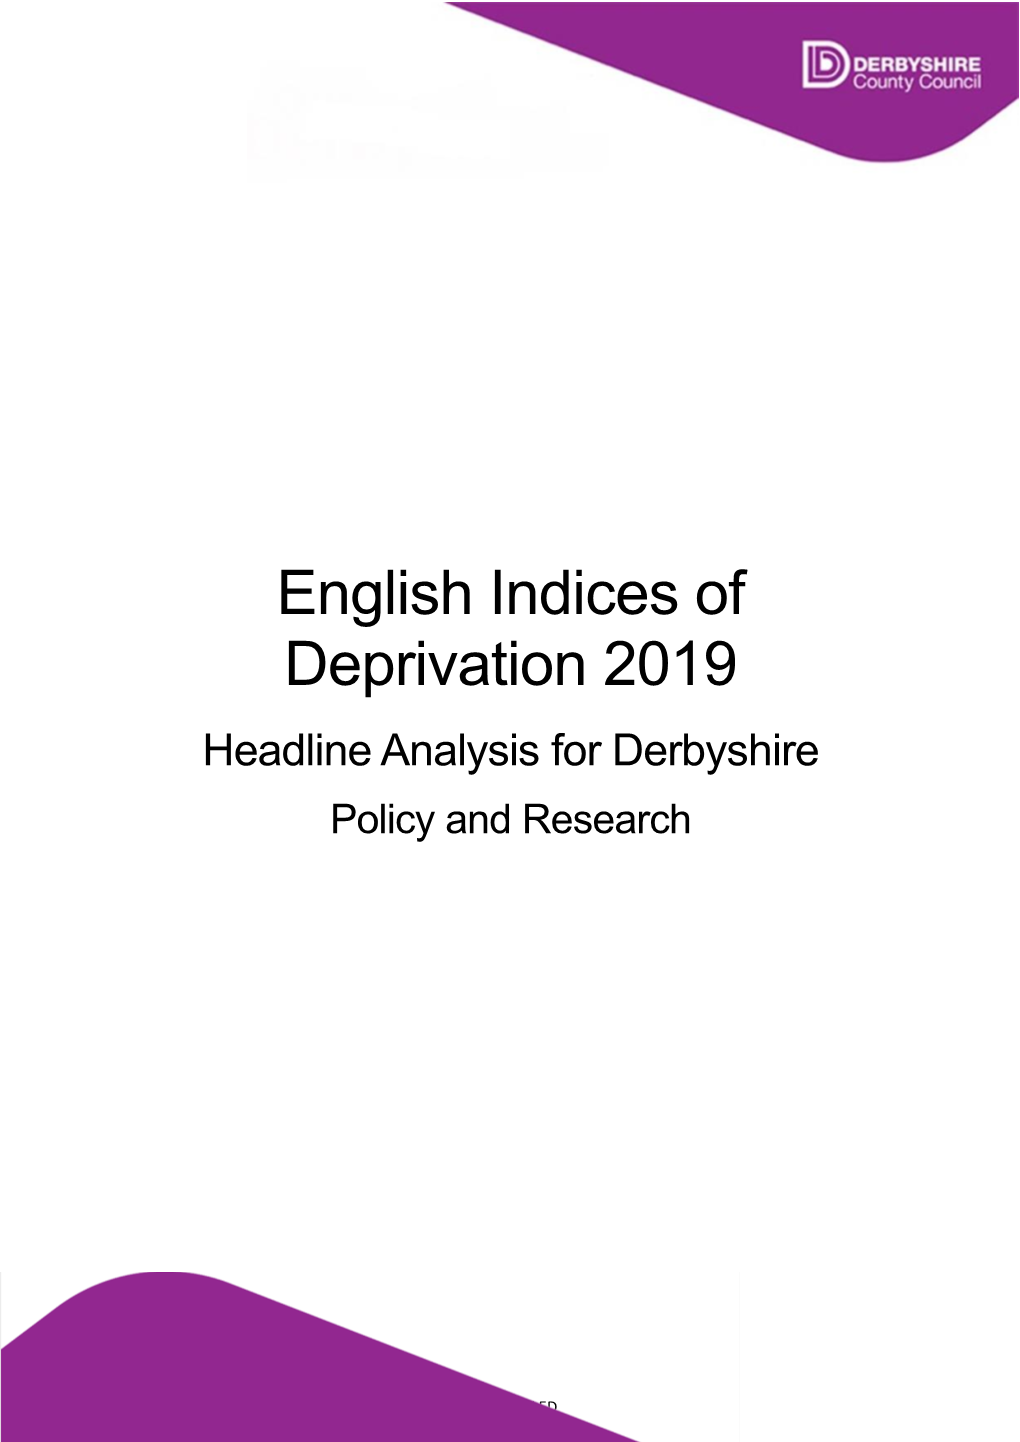 Indices of Deprivation (2019)